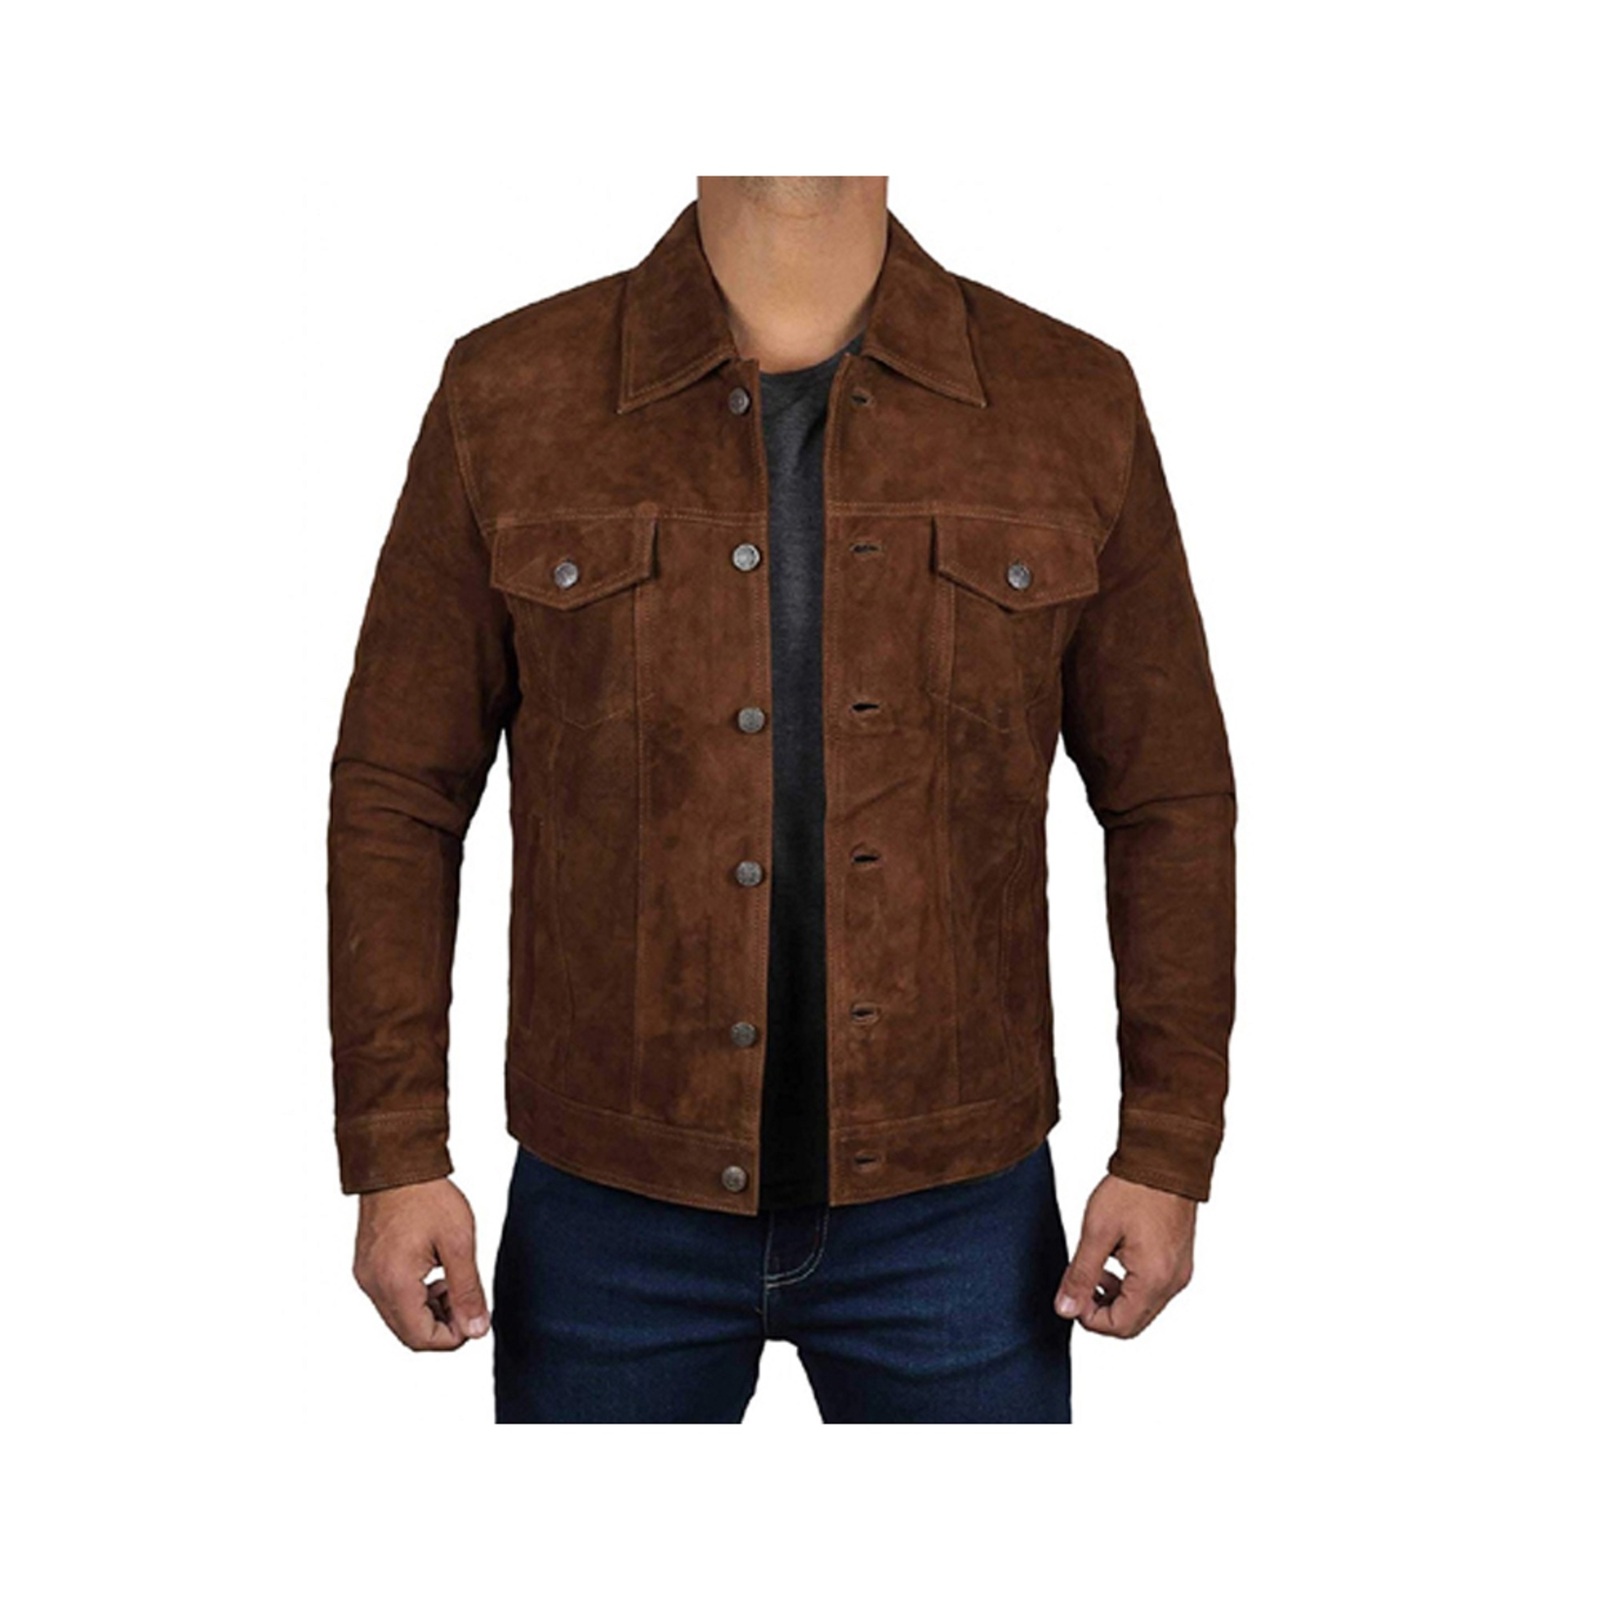 Mens Dark Brown Suede Real Leather Jacket with Shirt Collar and Flip Pockets